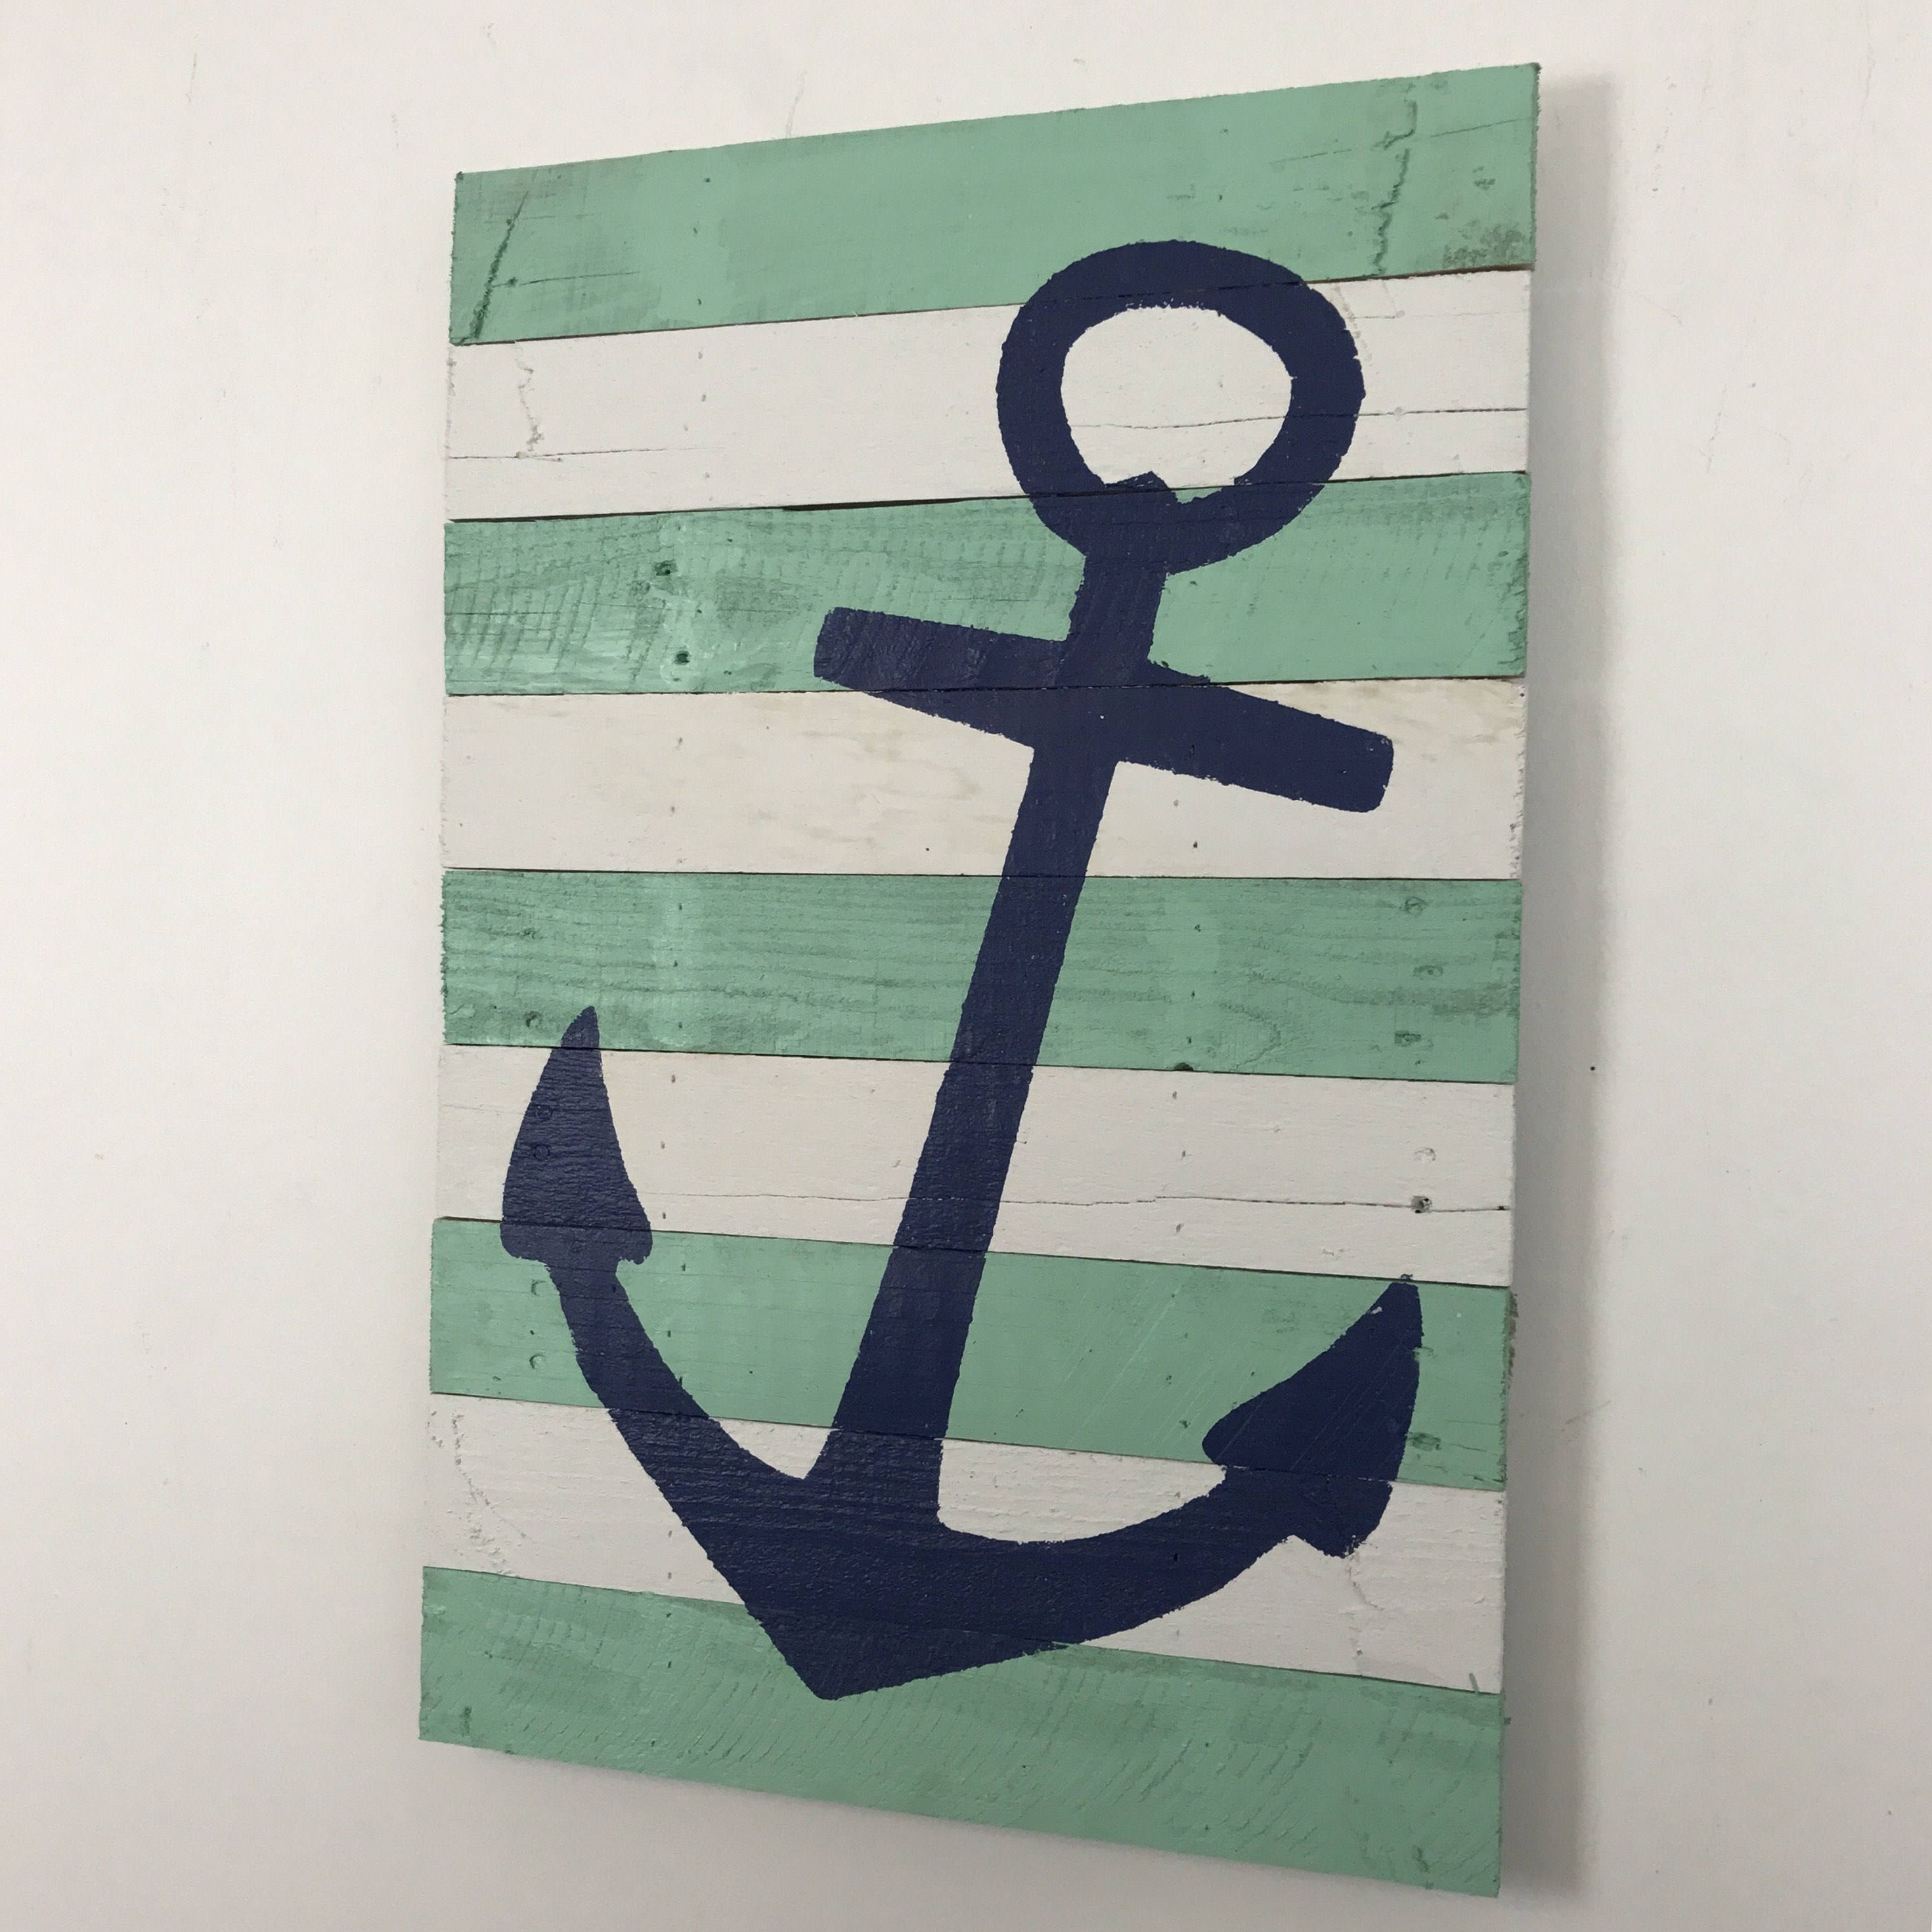 2018 Anchor Wall Art Within Amusing Anchor Wall Art Home Pictures Framed Navy Carousel Designs (View 16 of 20)